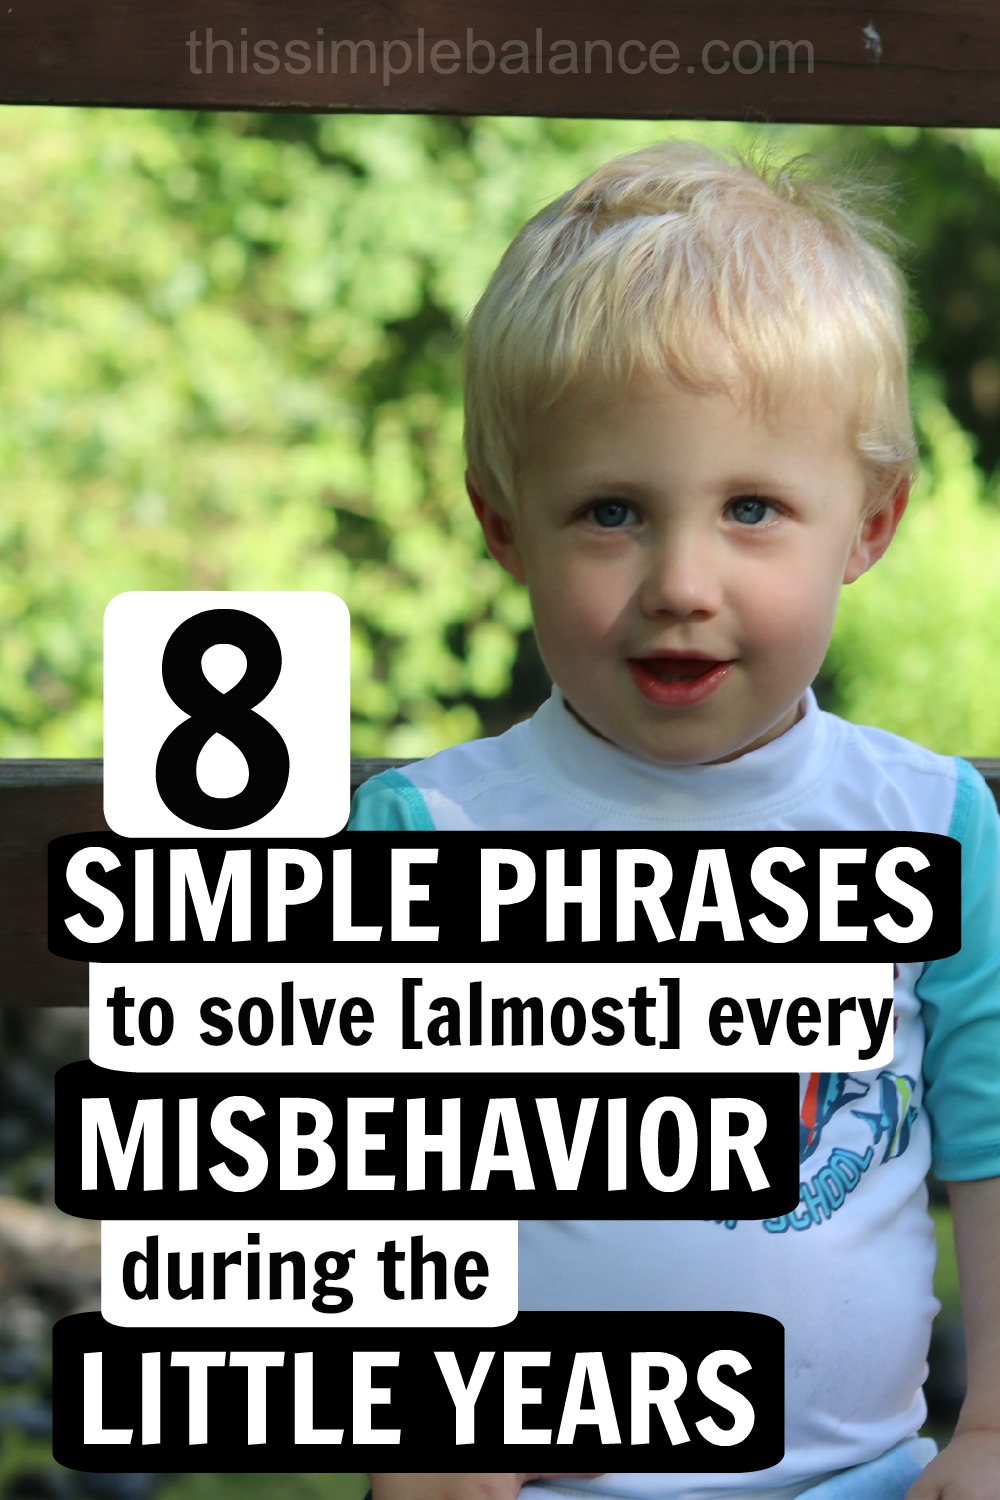 blond-haired, blue-eyed toddler with black and white text overlay "8 simple phrases to solve almost every misbehavior during the little years"